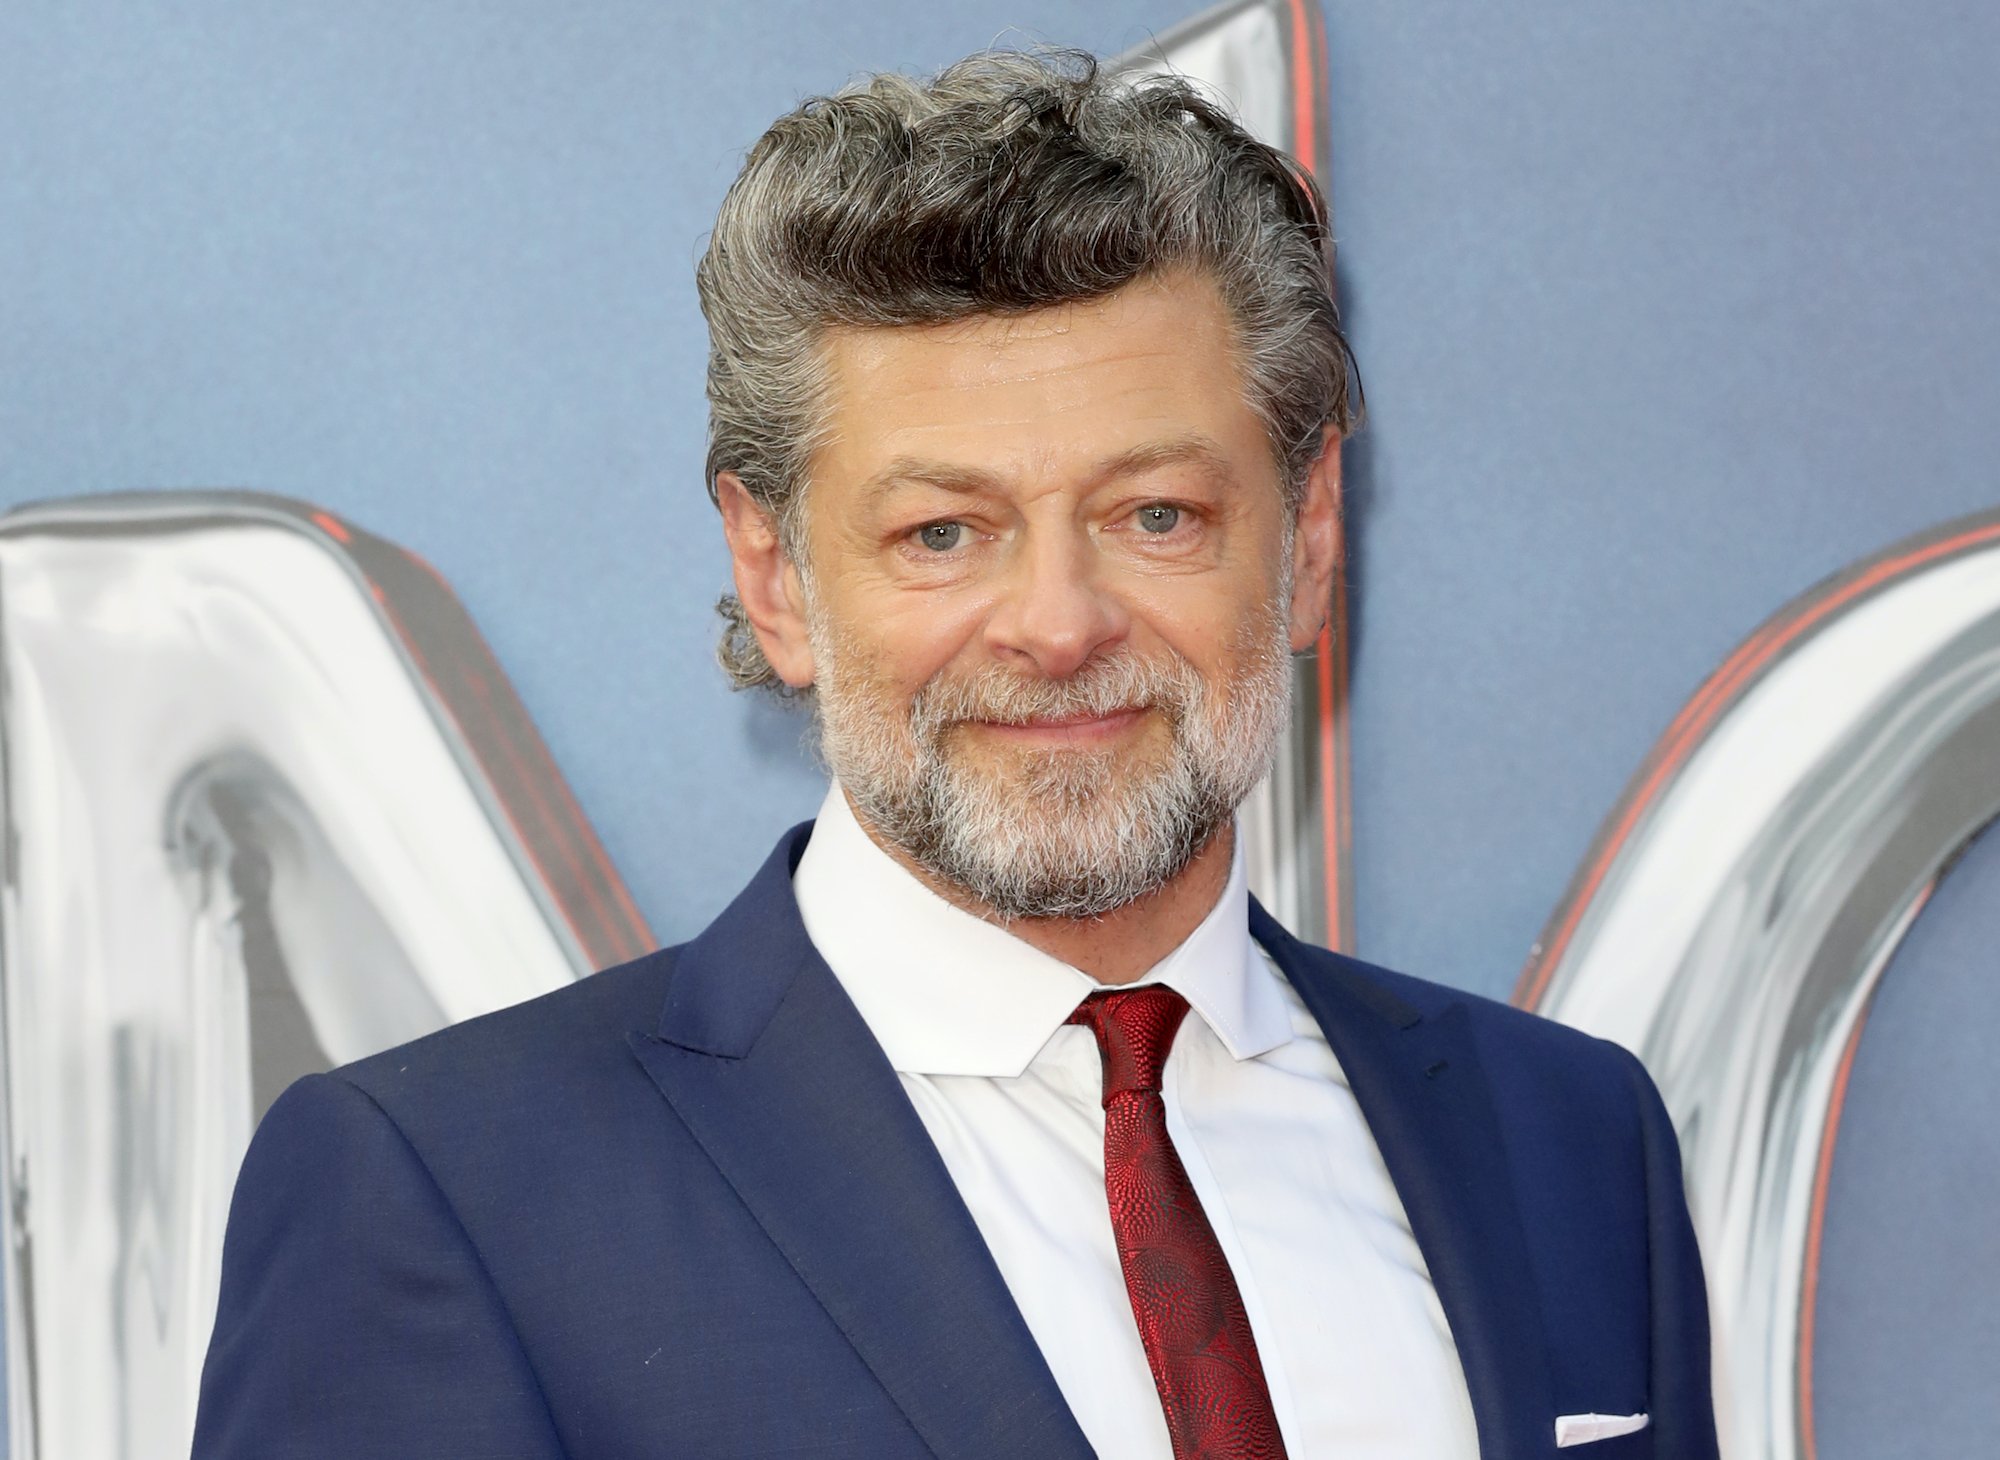 Director Andy Serkis attends the fan screening of 'Venom: Let There Be Carnage' at Cineworld Leicester Square on September 14, 2021 in London, England. He wears a dark blue suit, white shirt, and red tie as he stands in front of the light blue-grey backdrop.